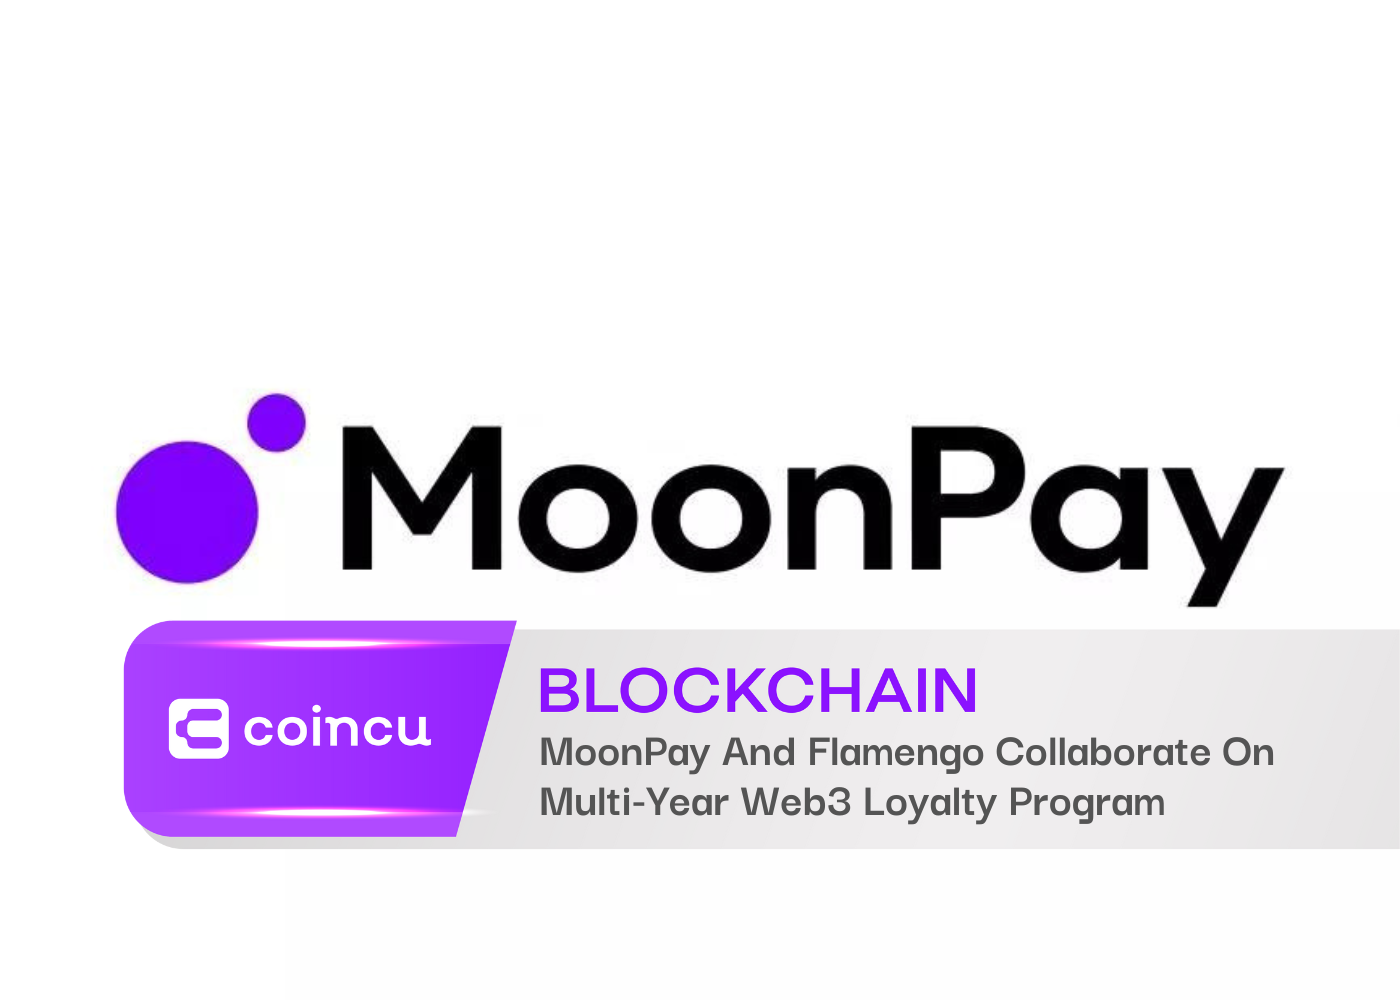 MoonPay And Flamengo Collaborate On